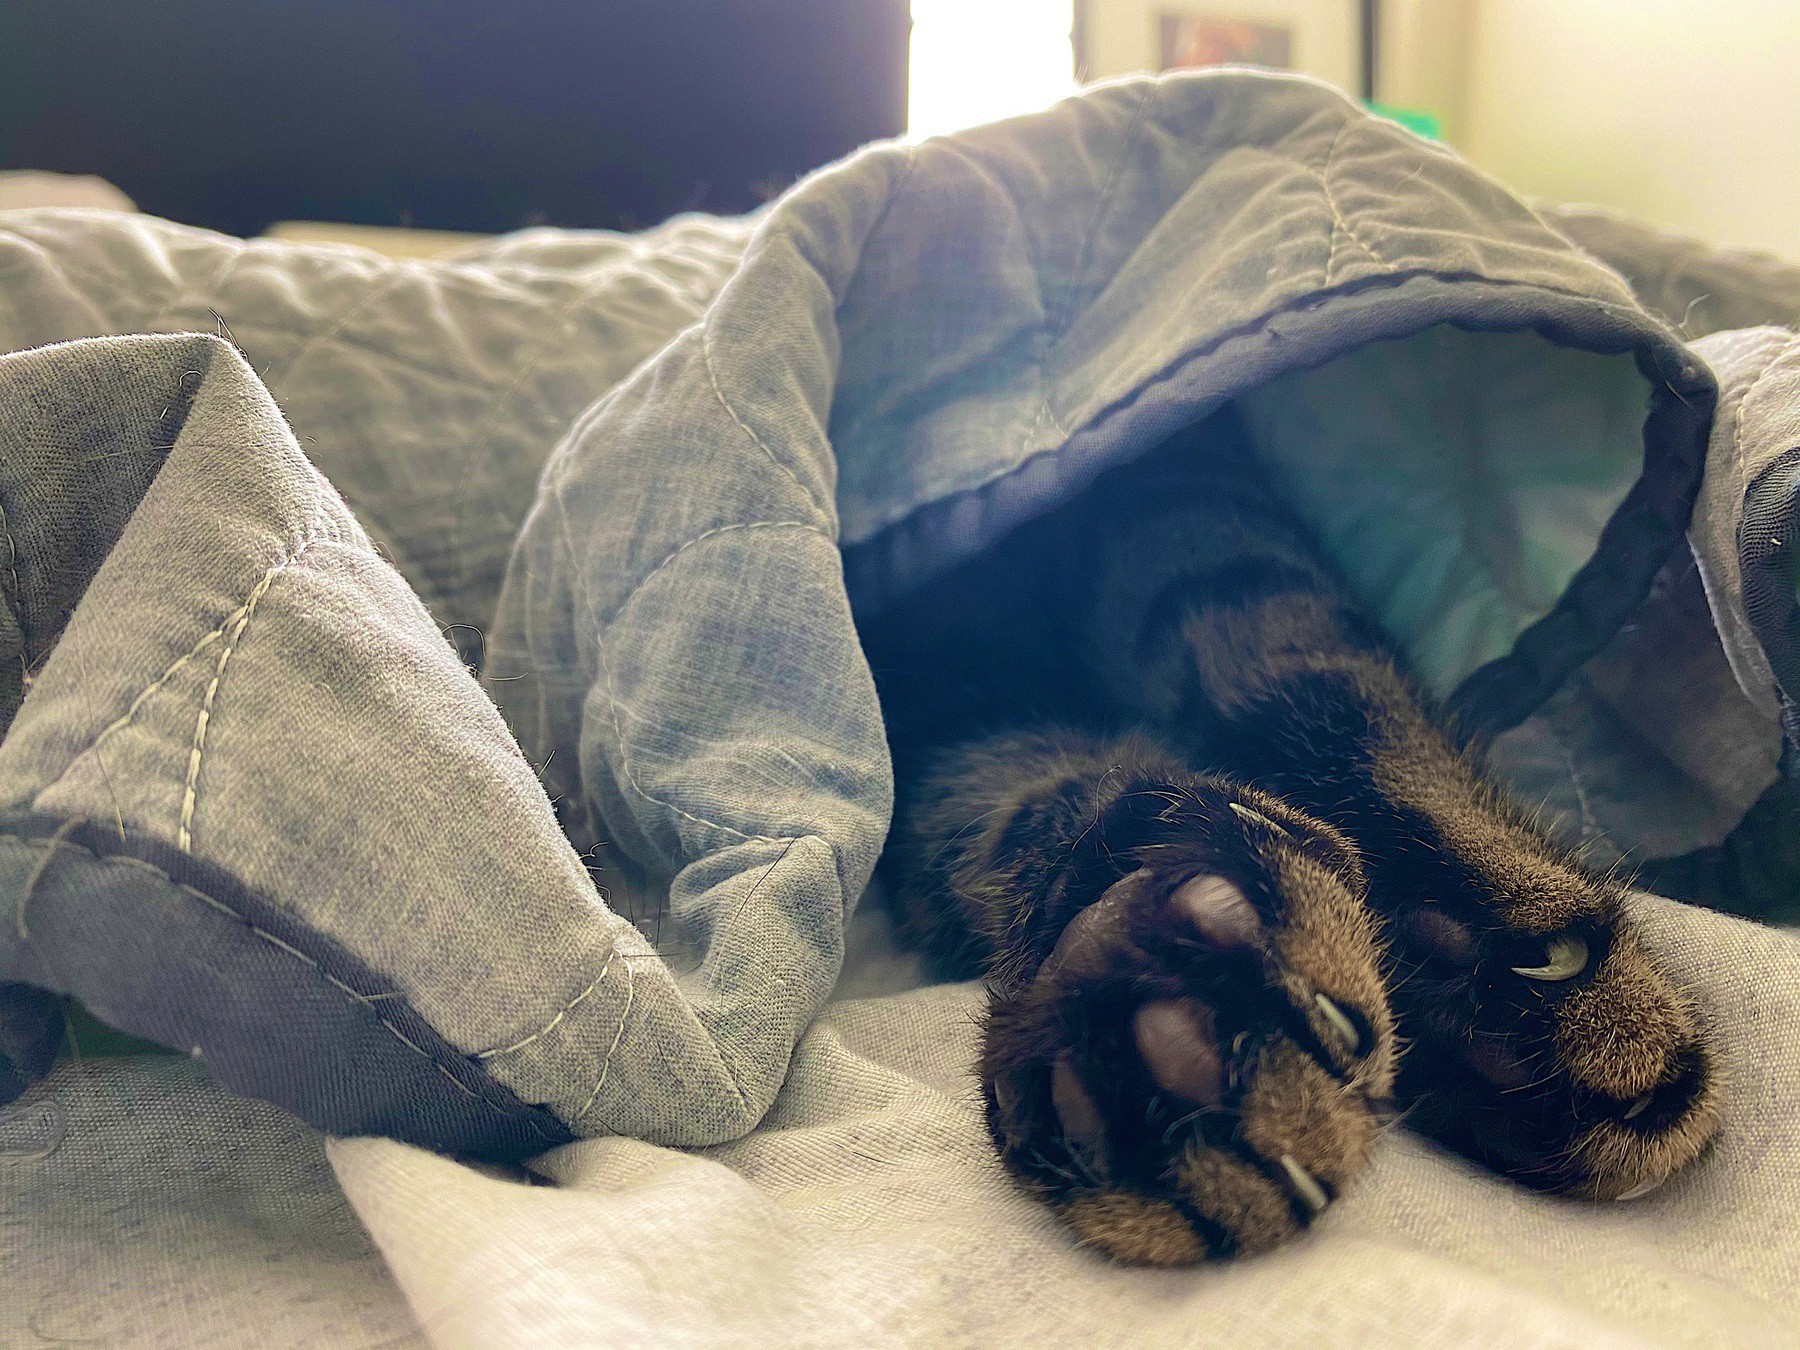 Willow's paws peeking from under the covers